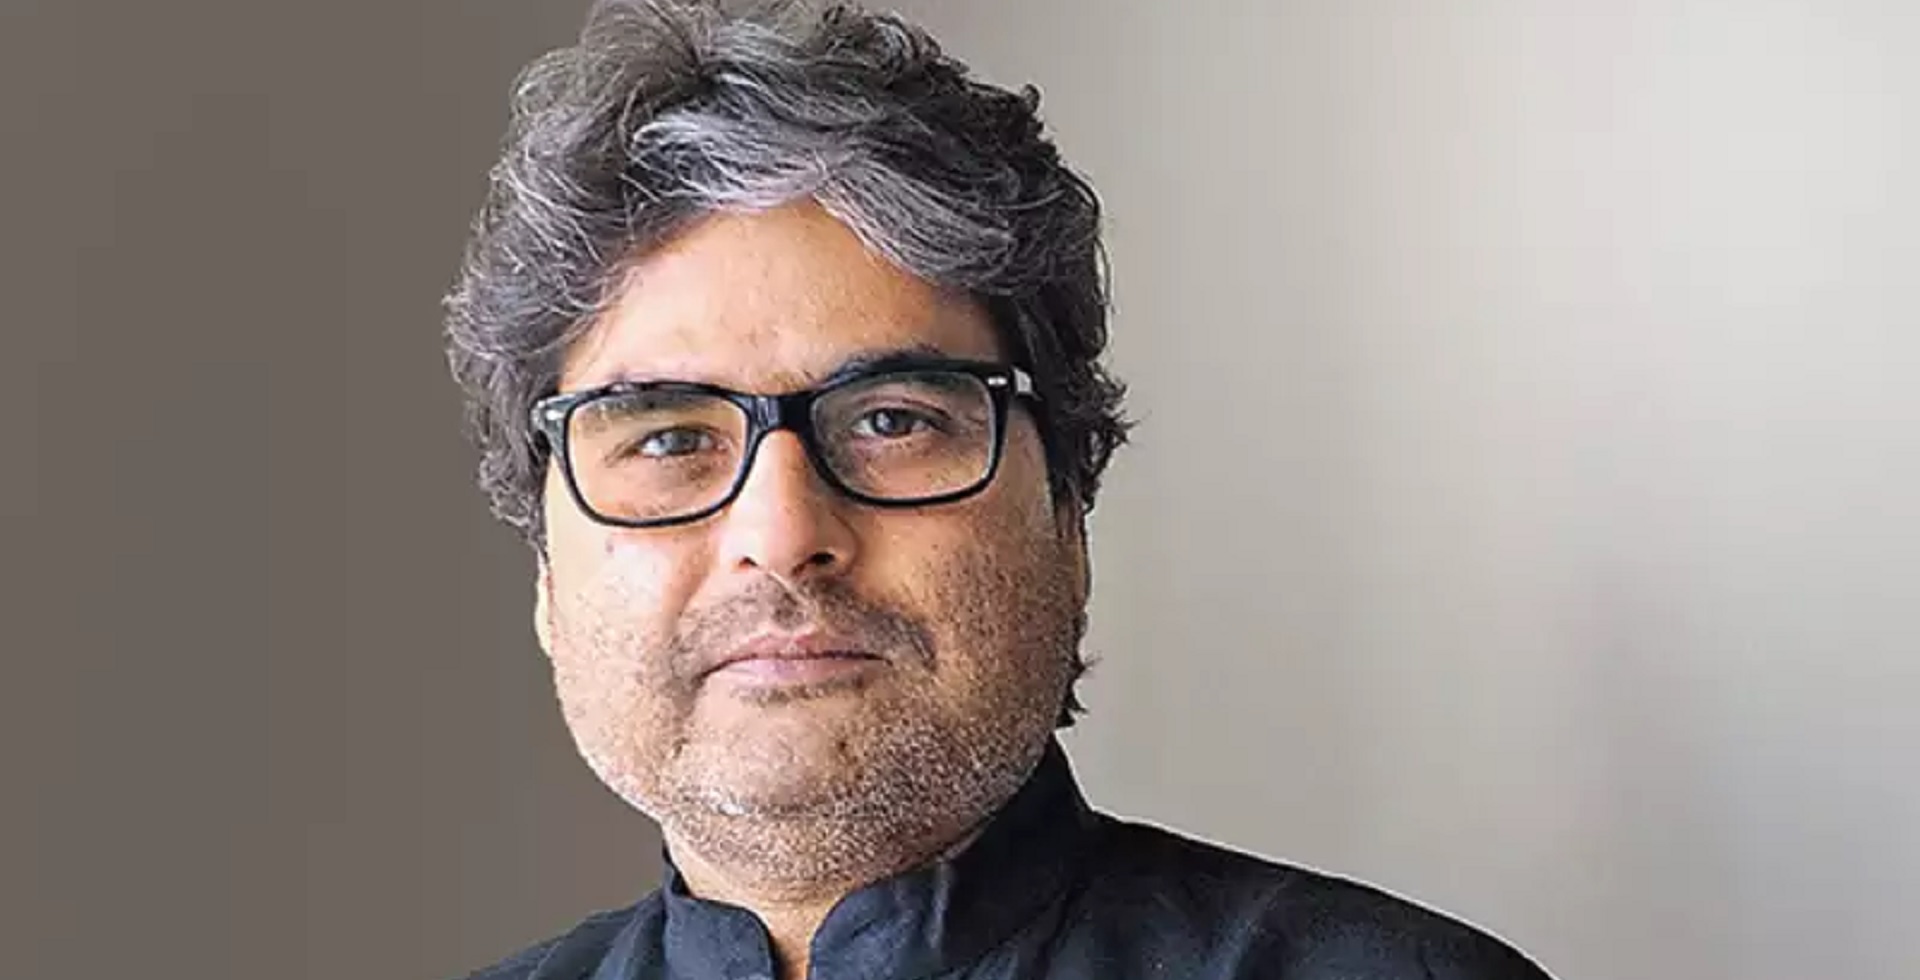 Vishal Bhardwaj On Bollywood, “It is a beautiful industry, there is no toxic culture”